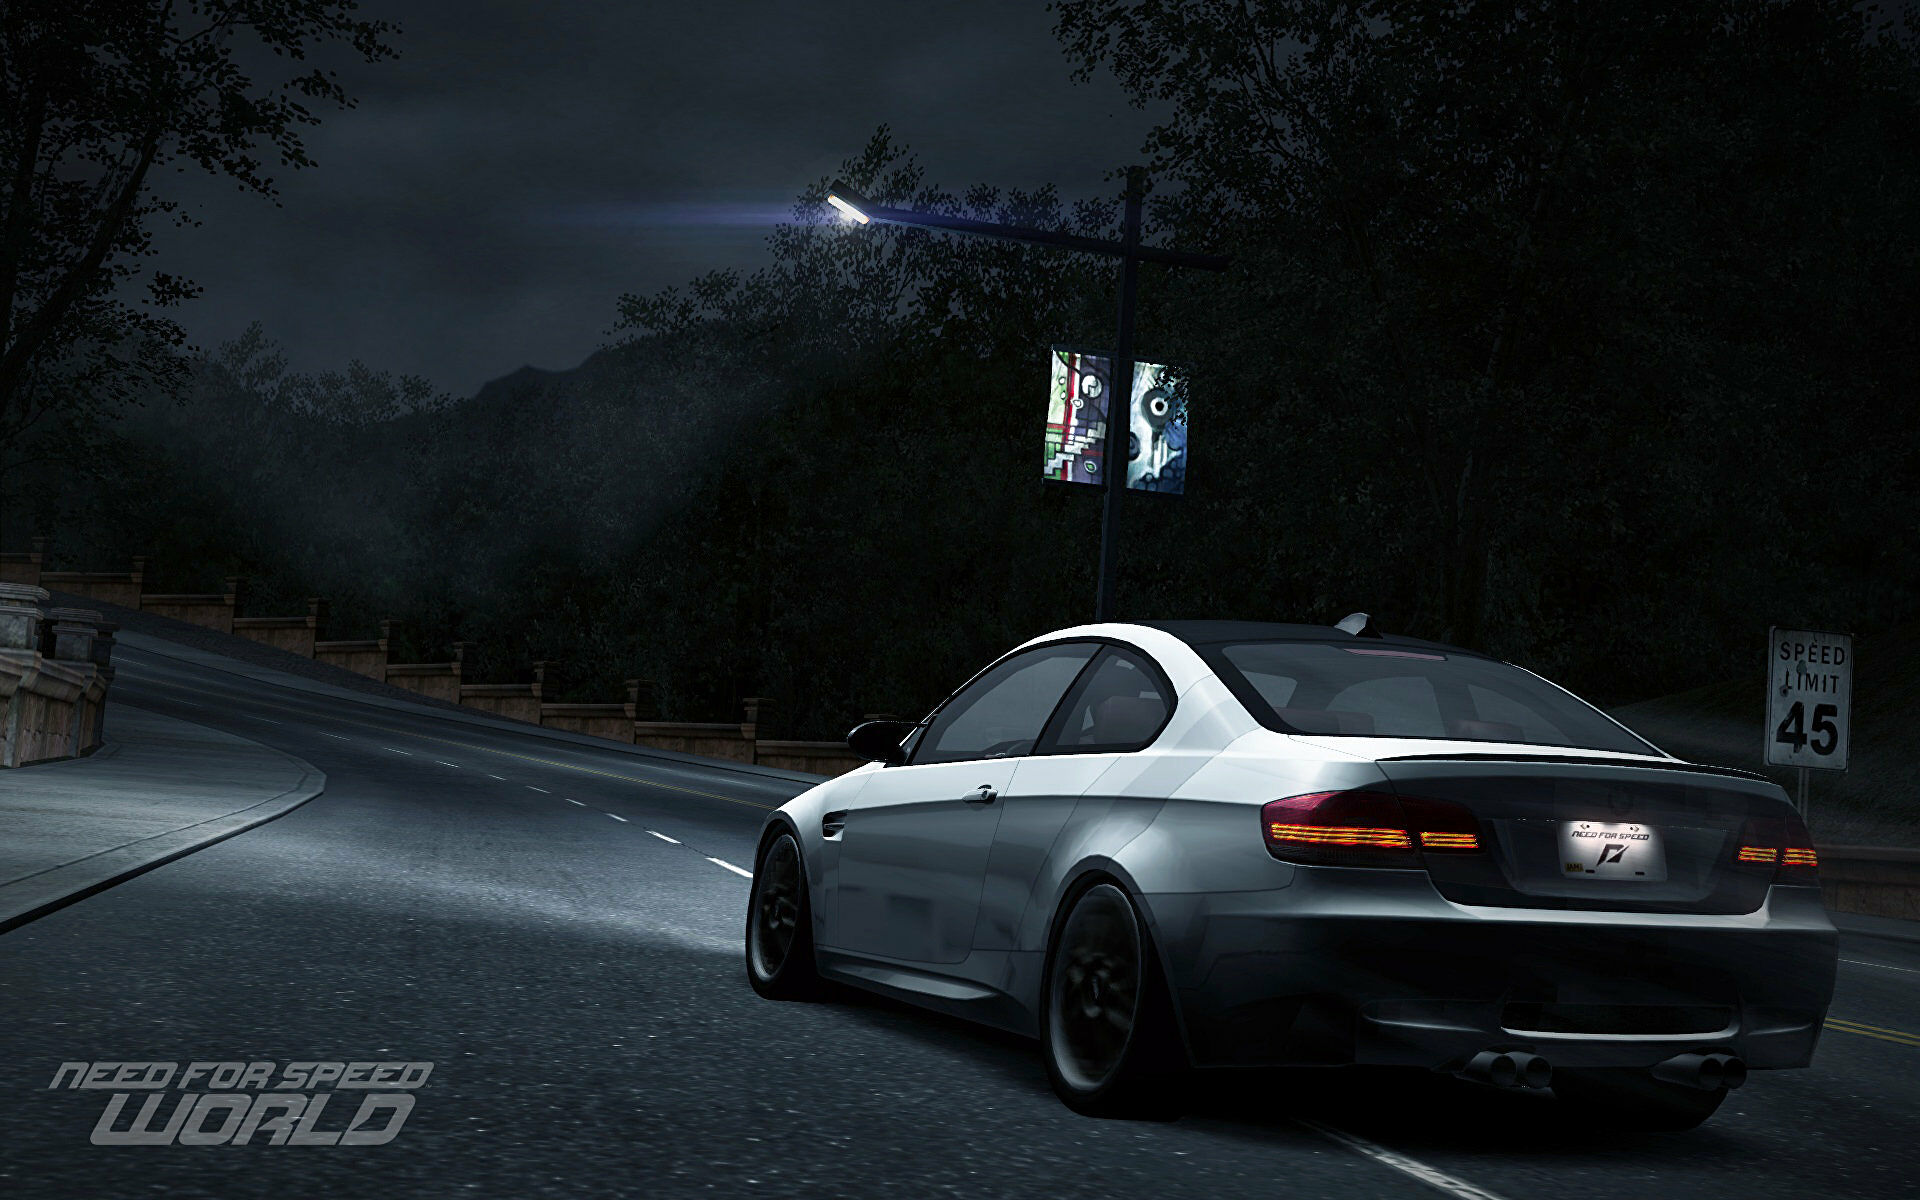 NFS World Gets Dynamic Day Night Cycle